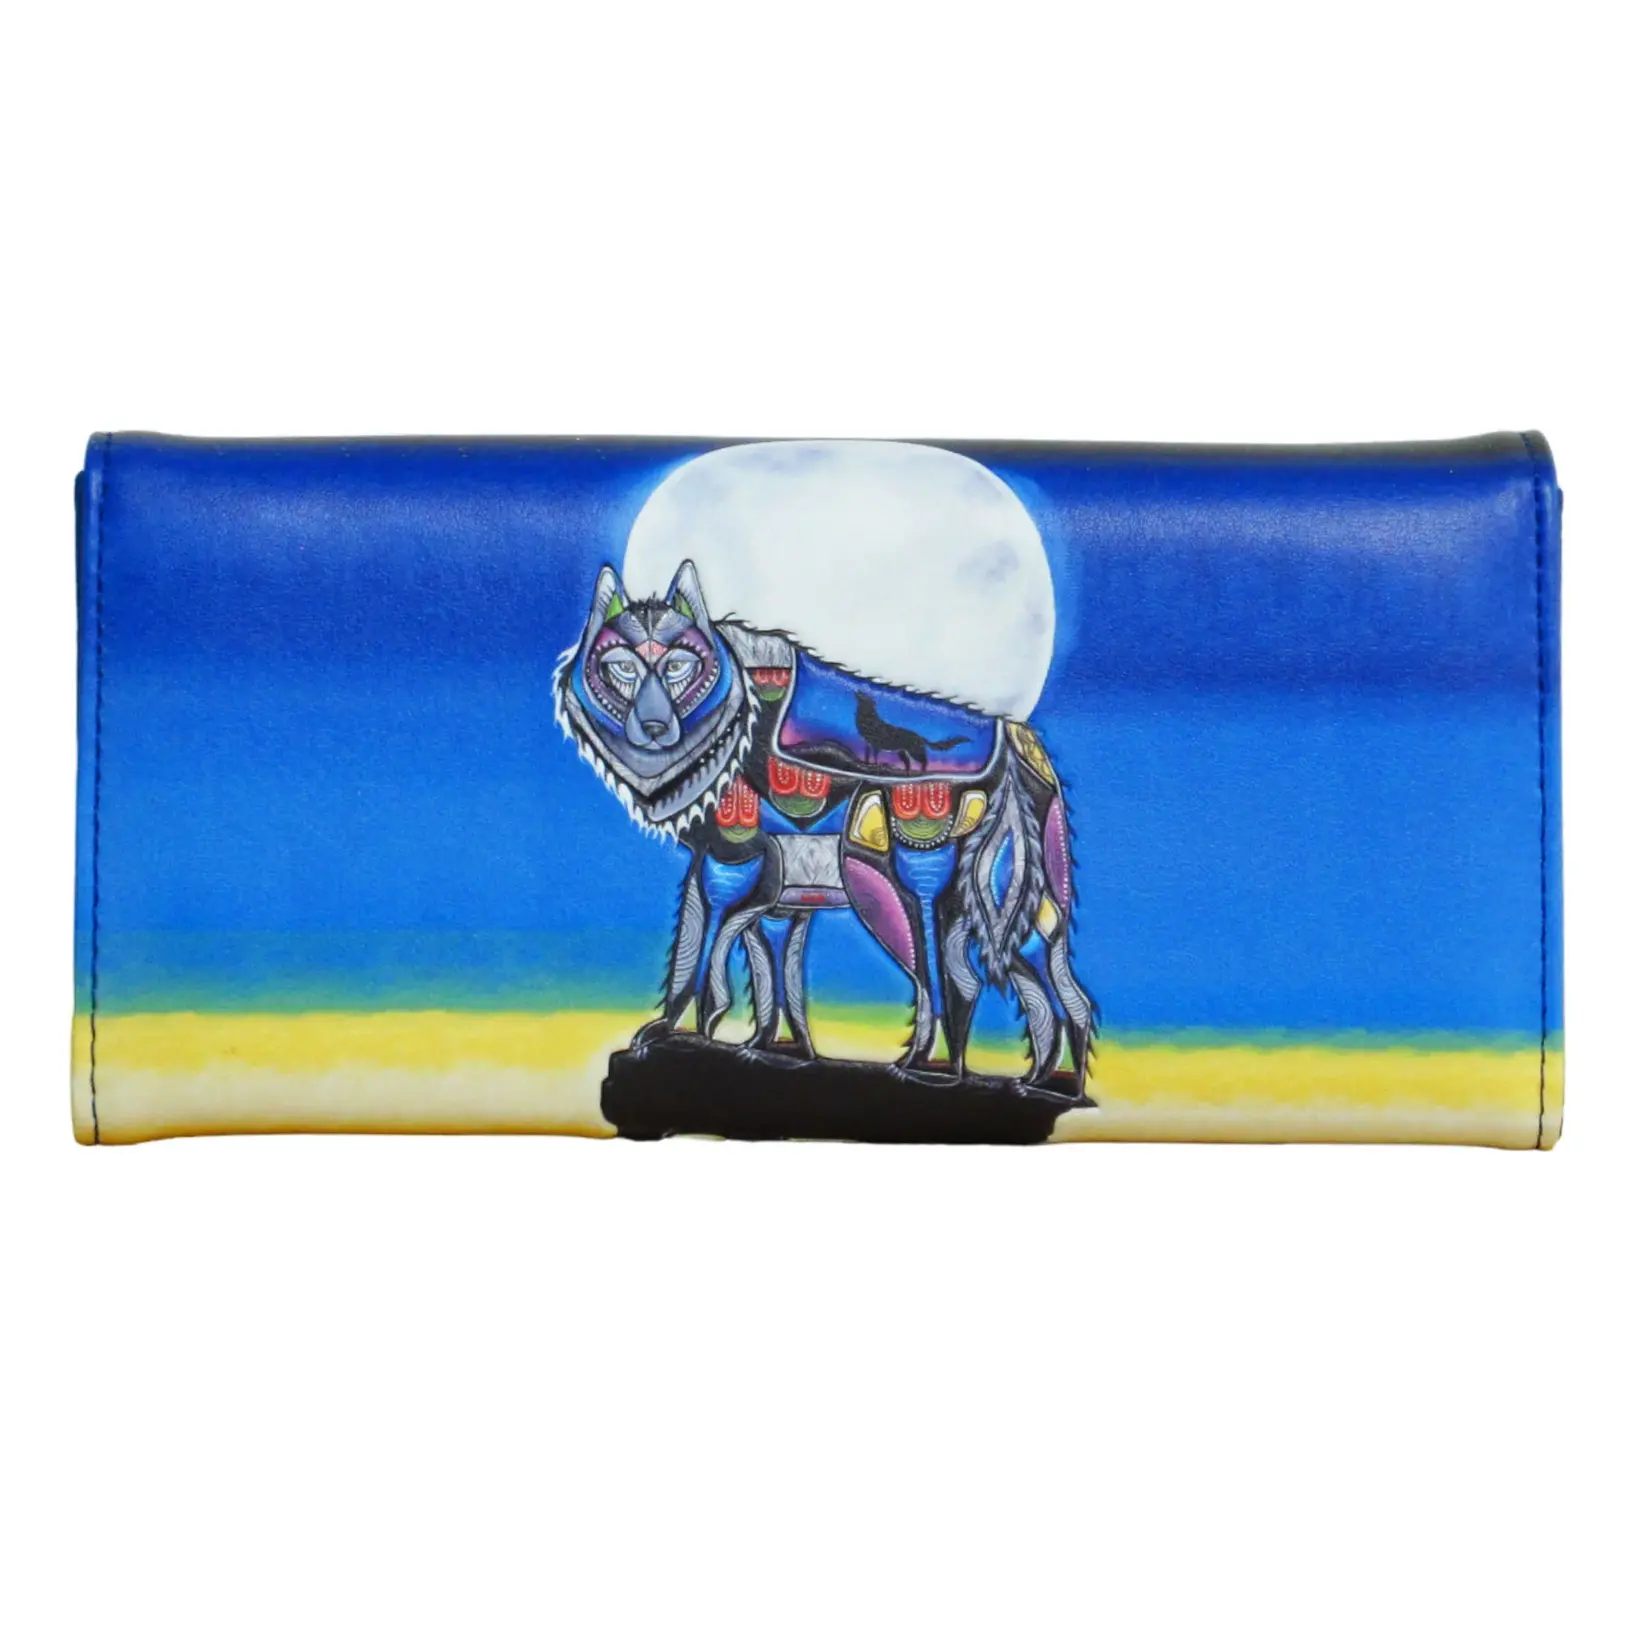 Jessica Somers Jessica Somers "Wolf" Wallet